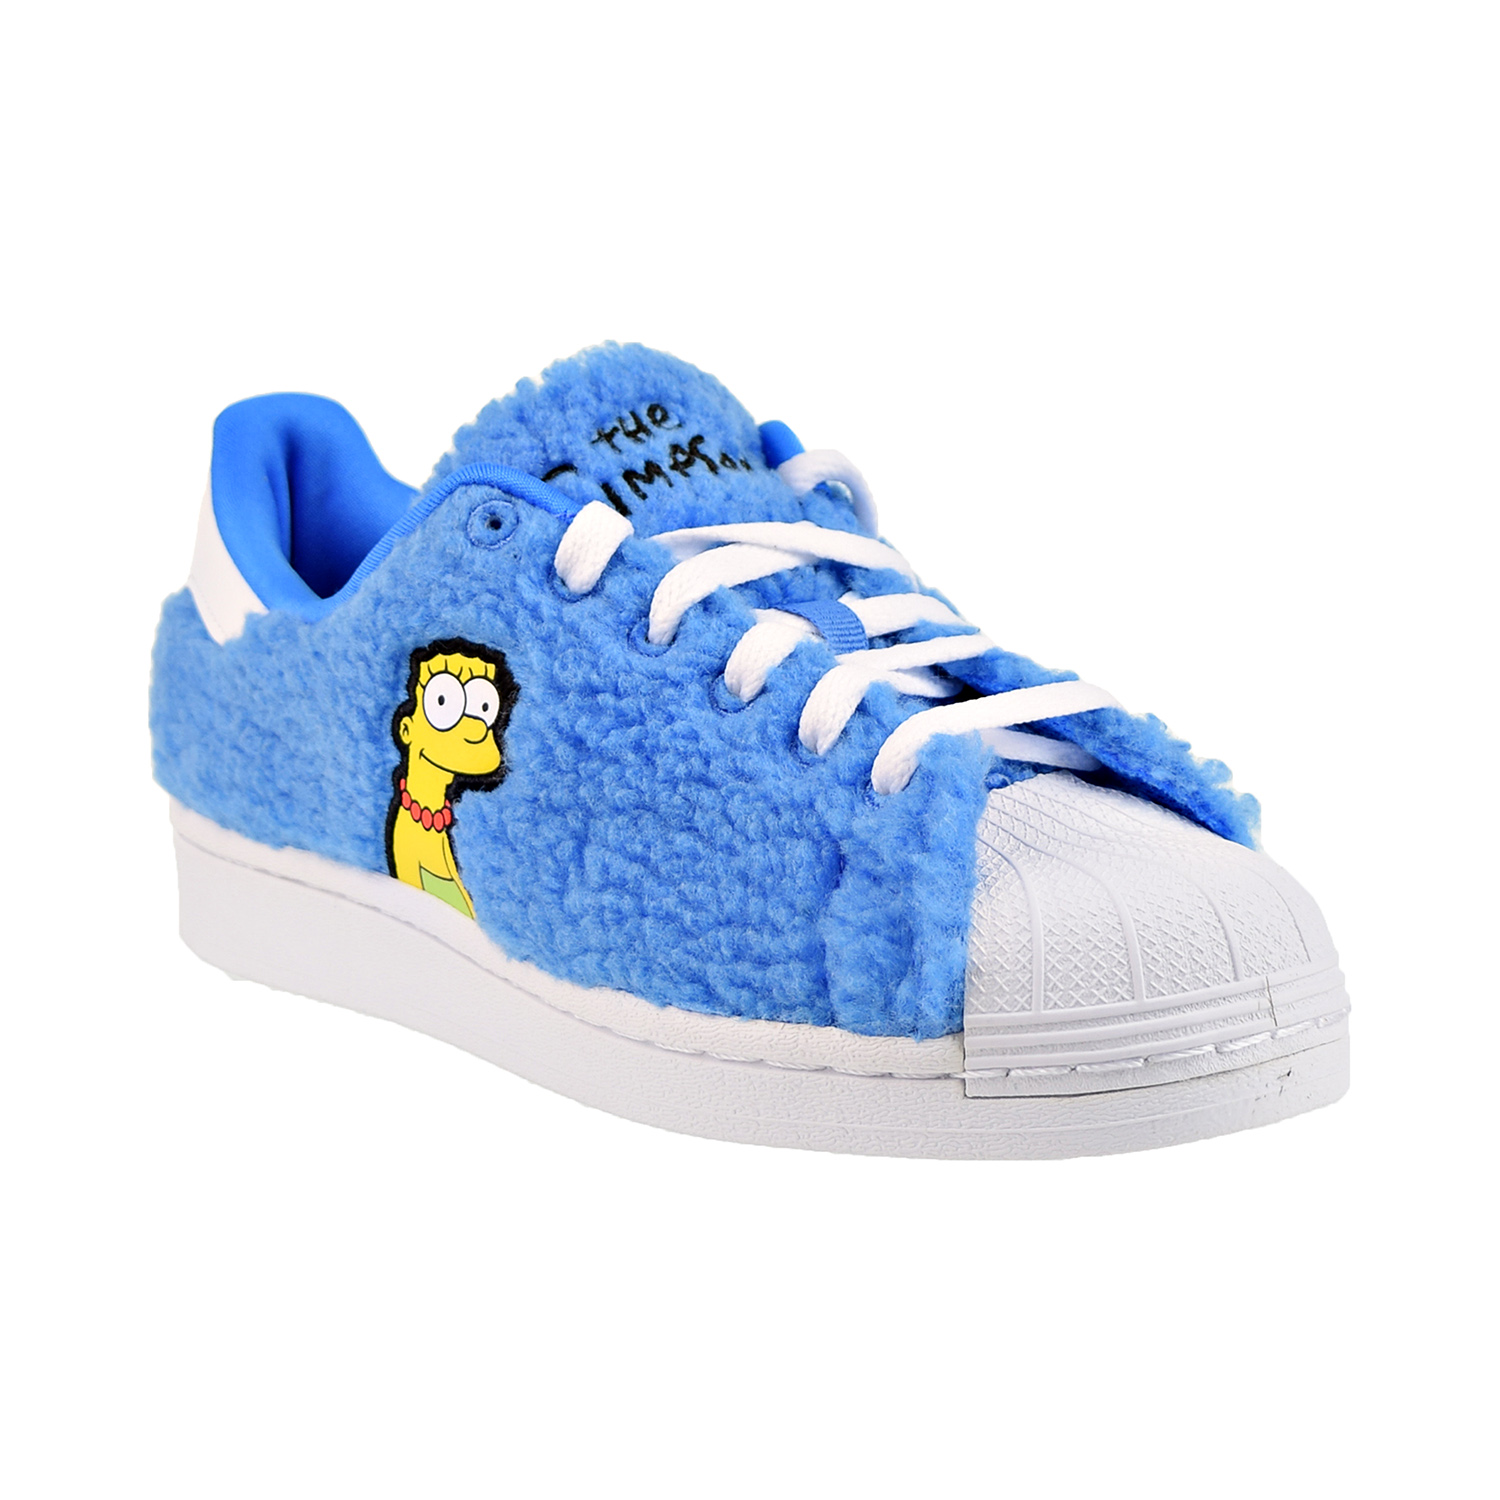 Adidas x The Simpsons Superstar "Marge" Big Kids' Shoes Blue-White gz1774